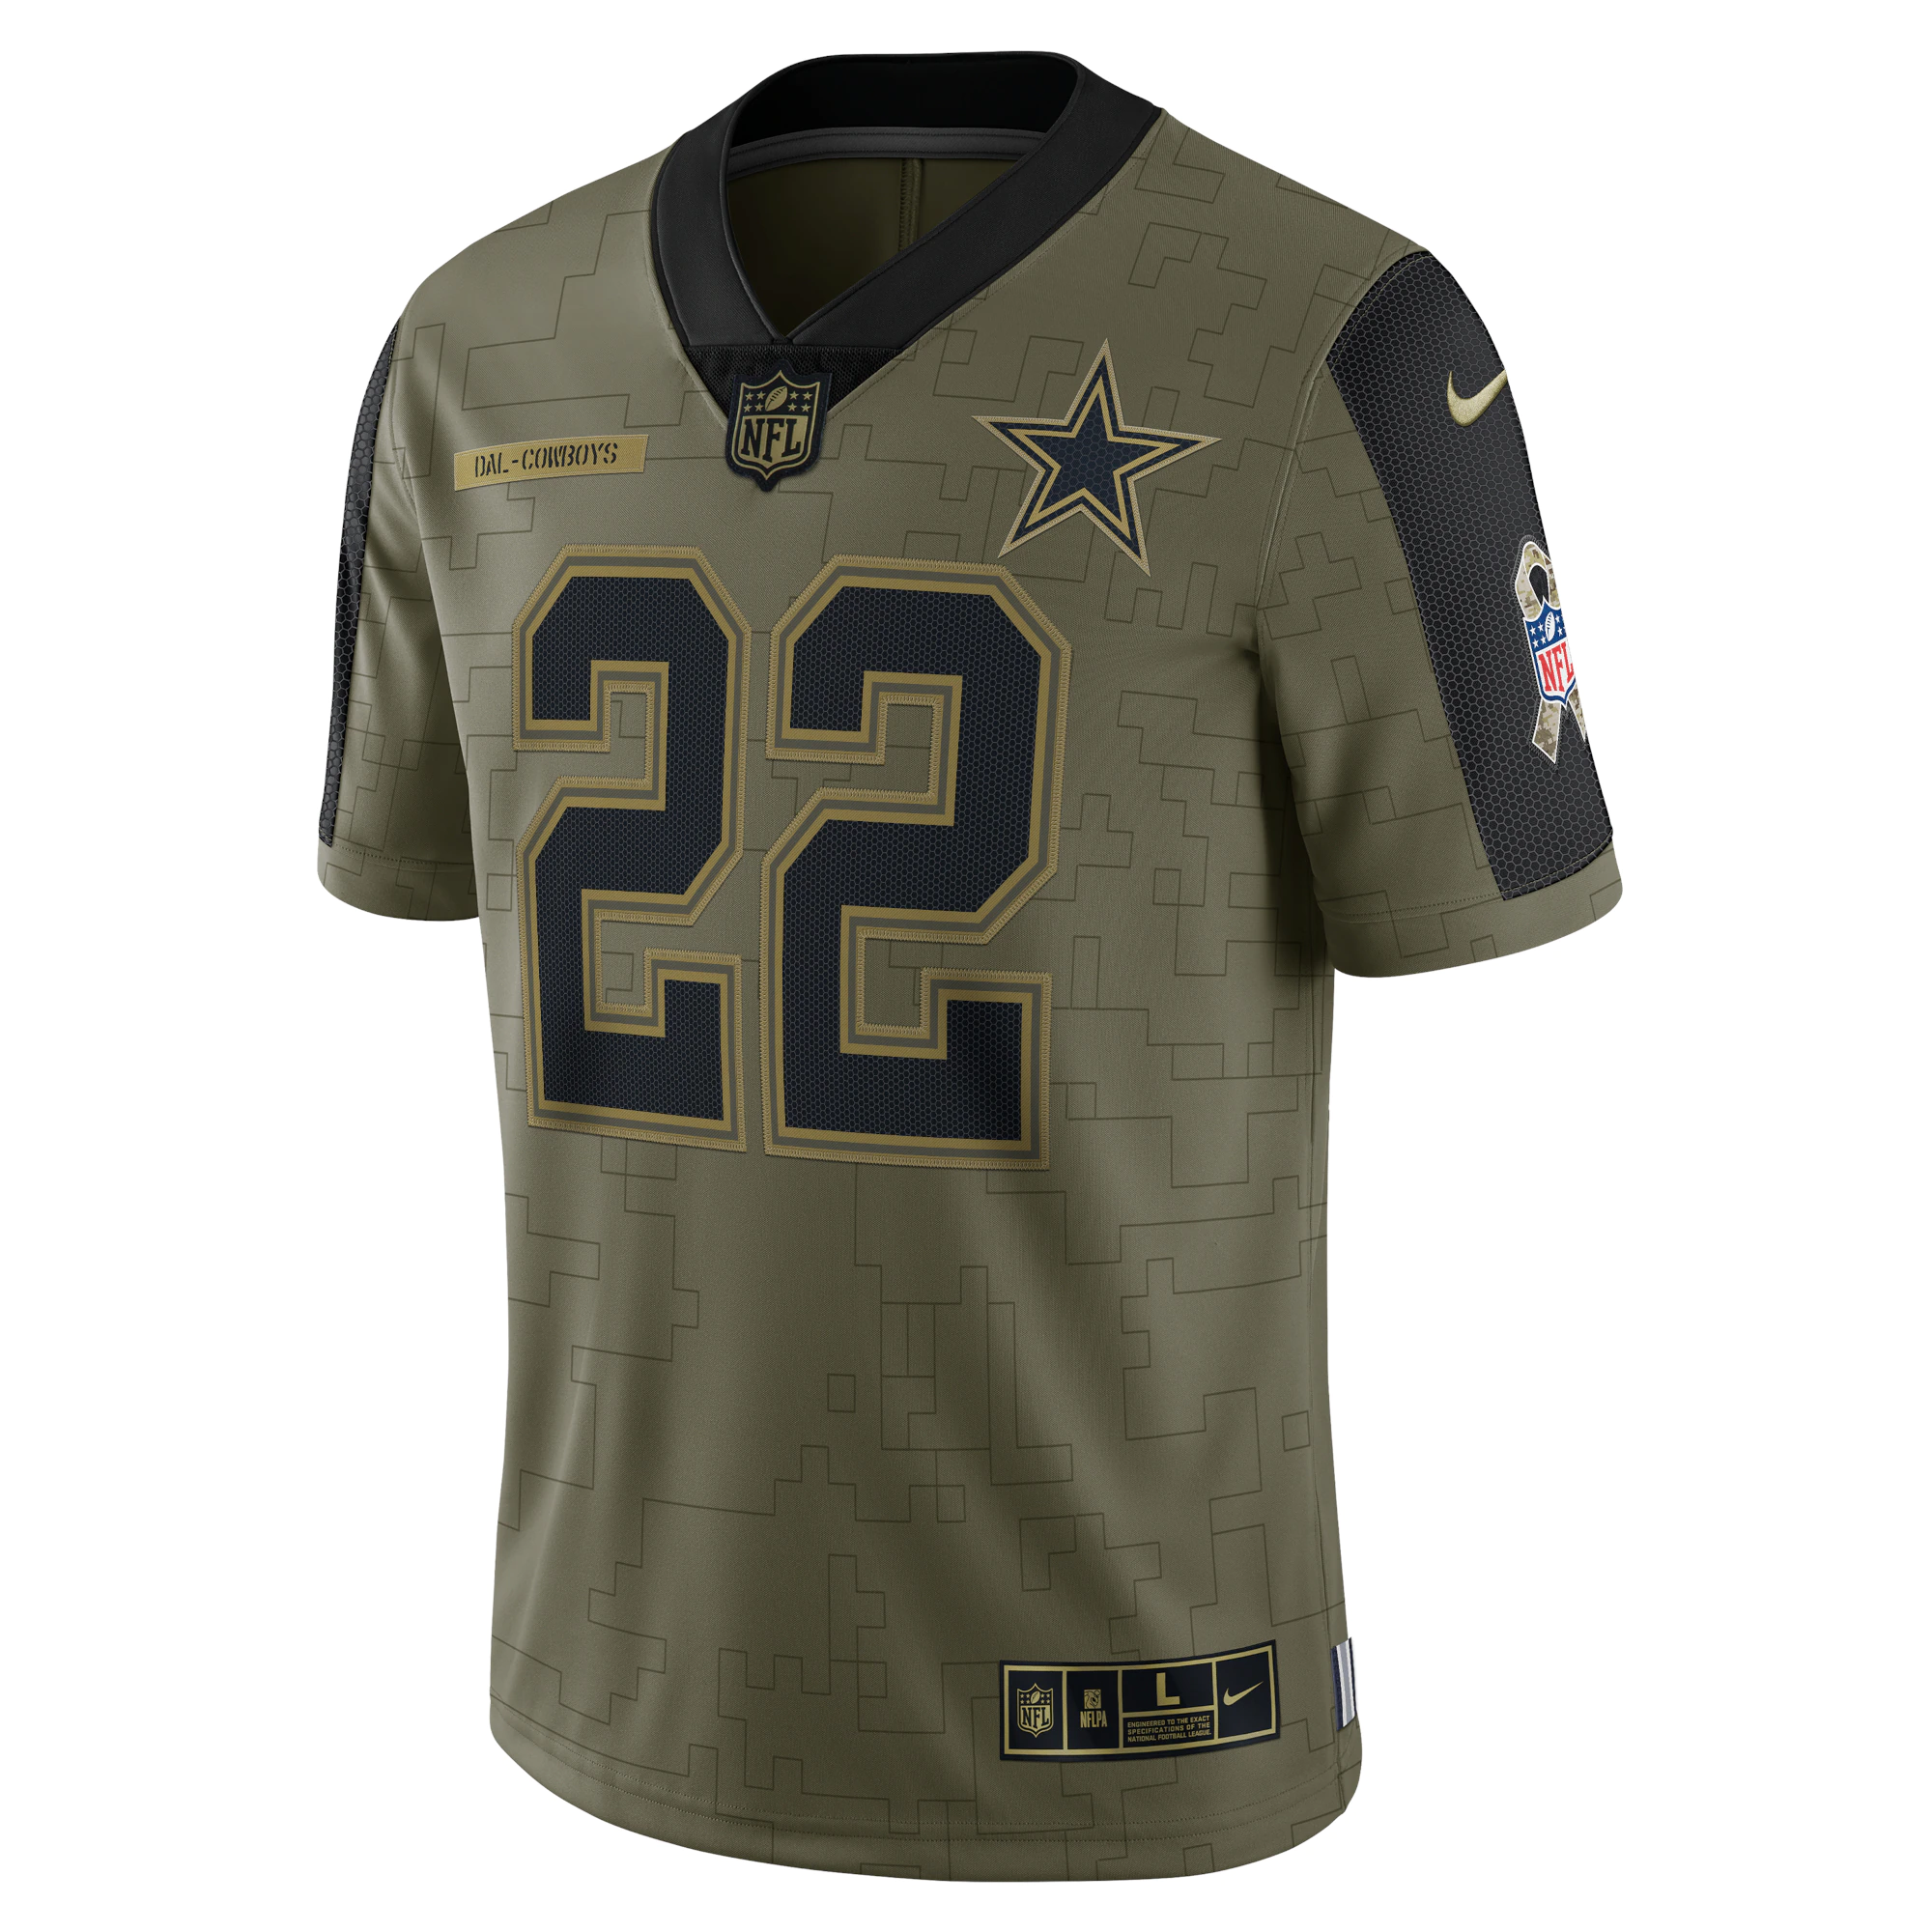 Men's Dallas Cowboys Emmitt Smith Nike Olive 2021 Salute To Service Retired Player Limited Jersey